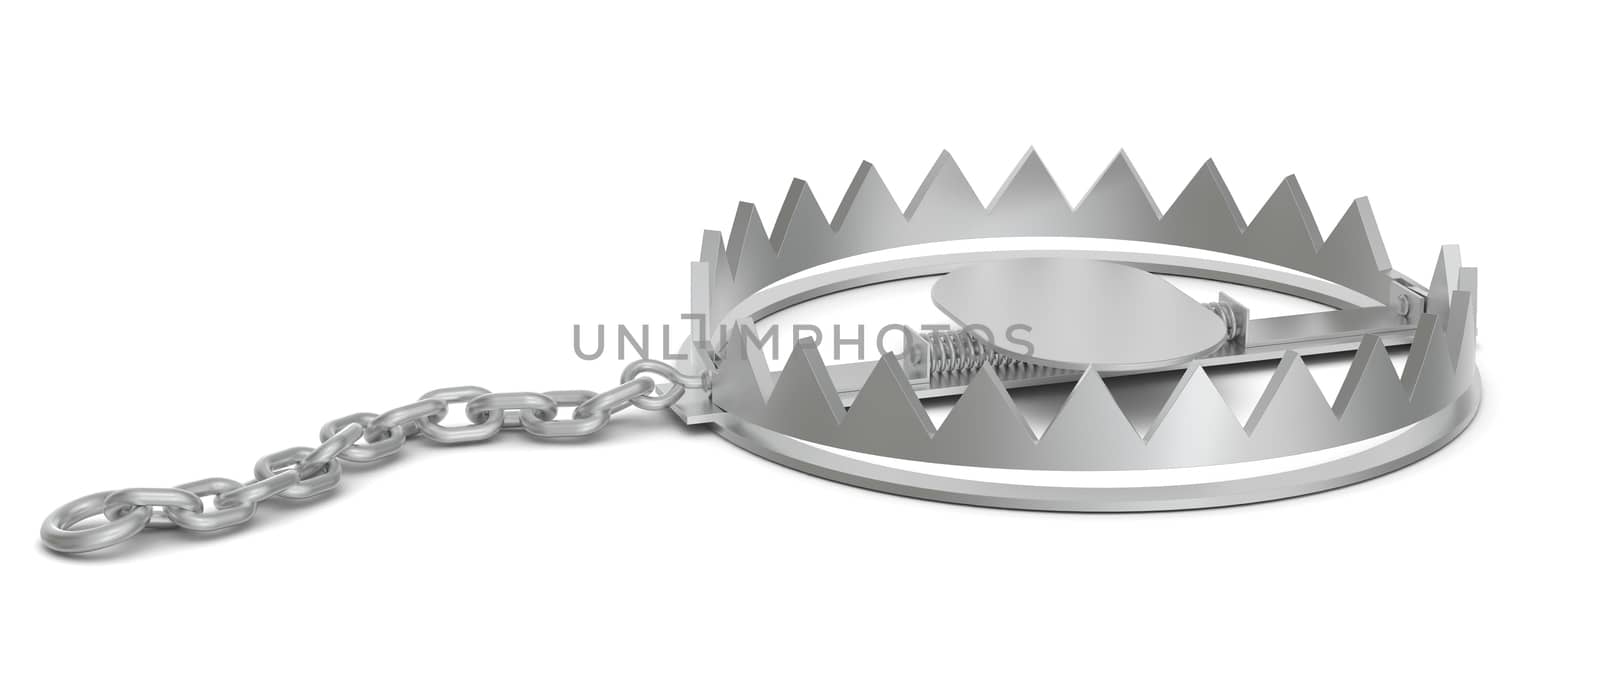 Bear trap on isolated white background, side view